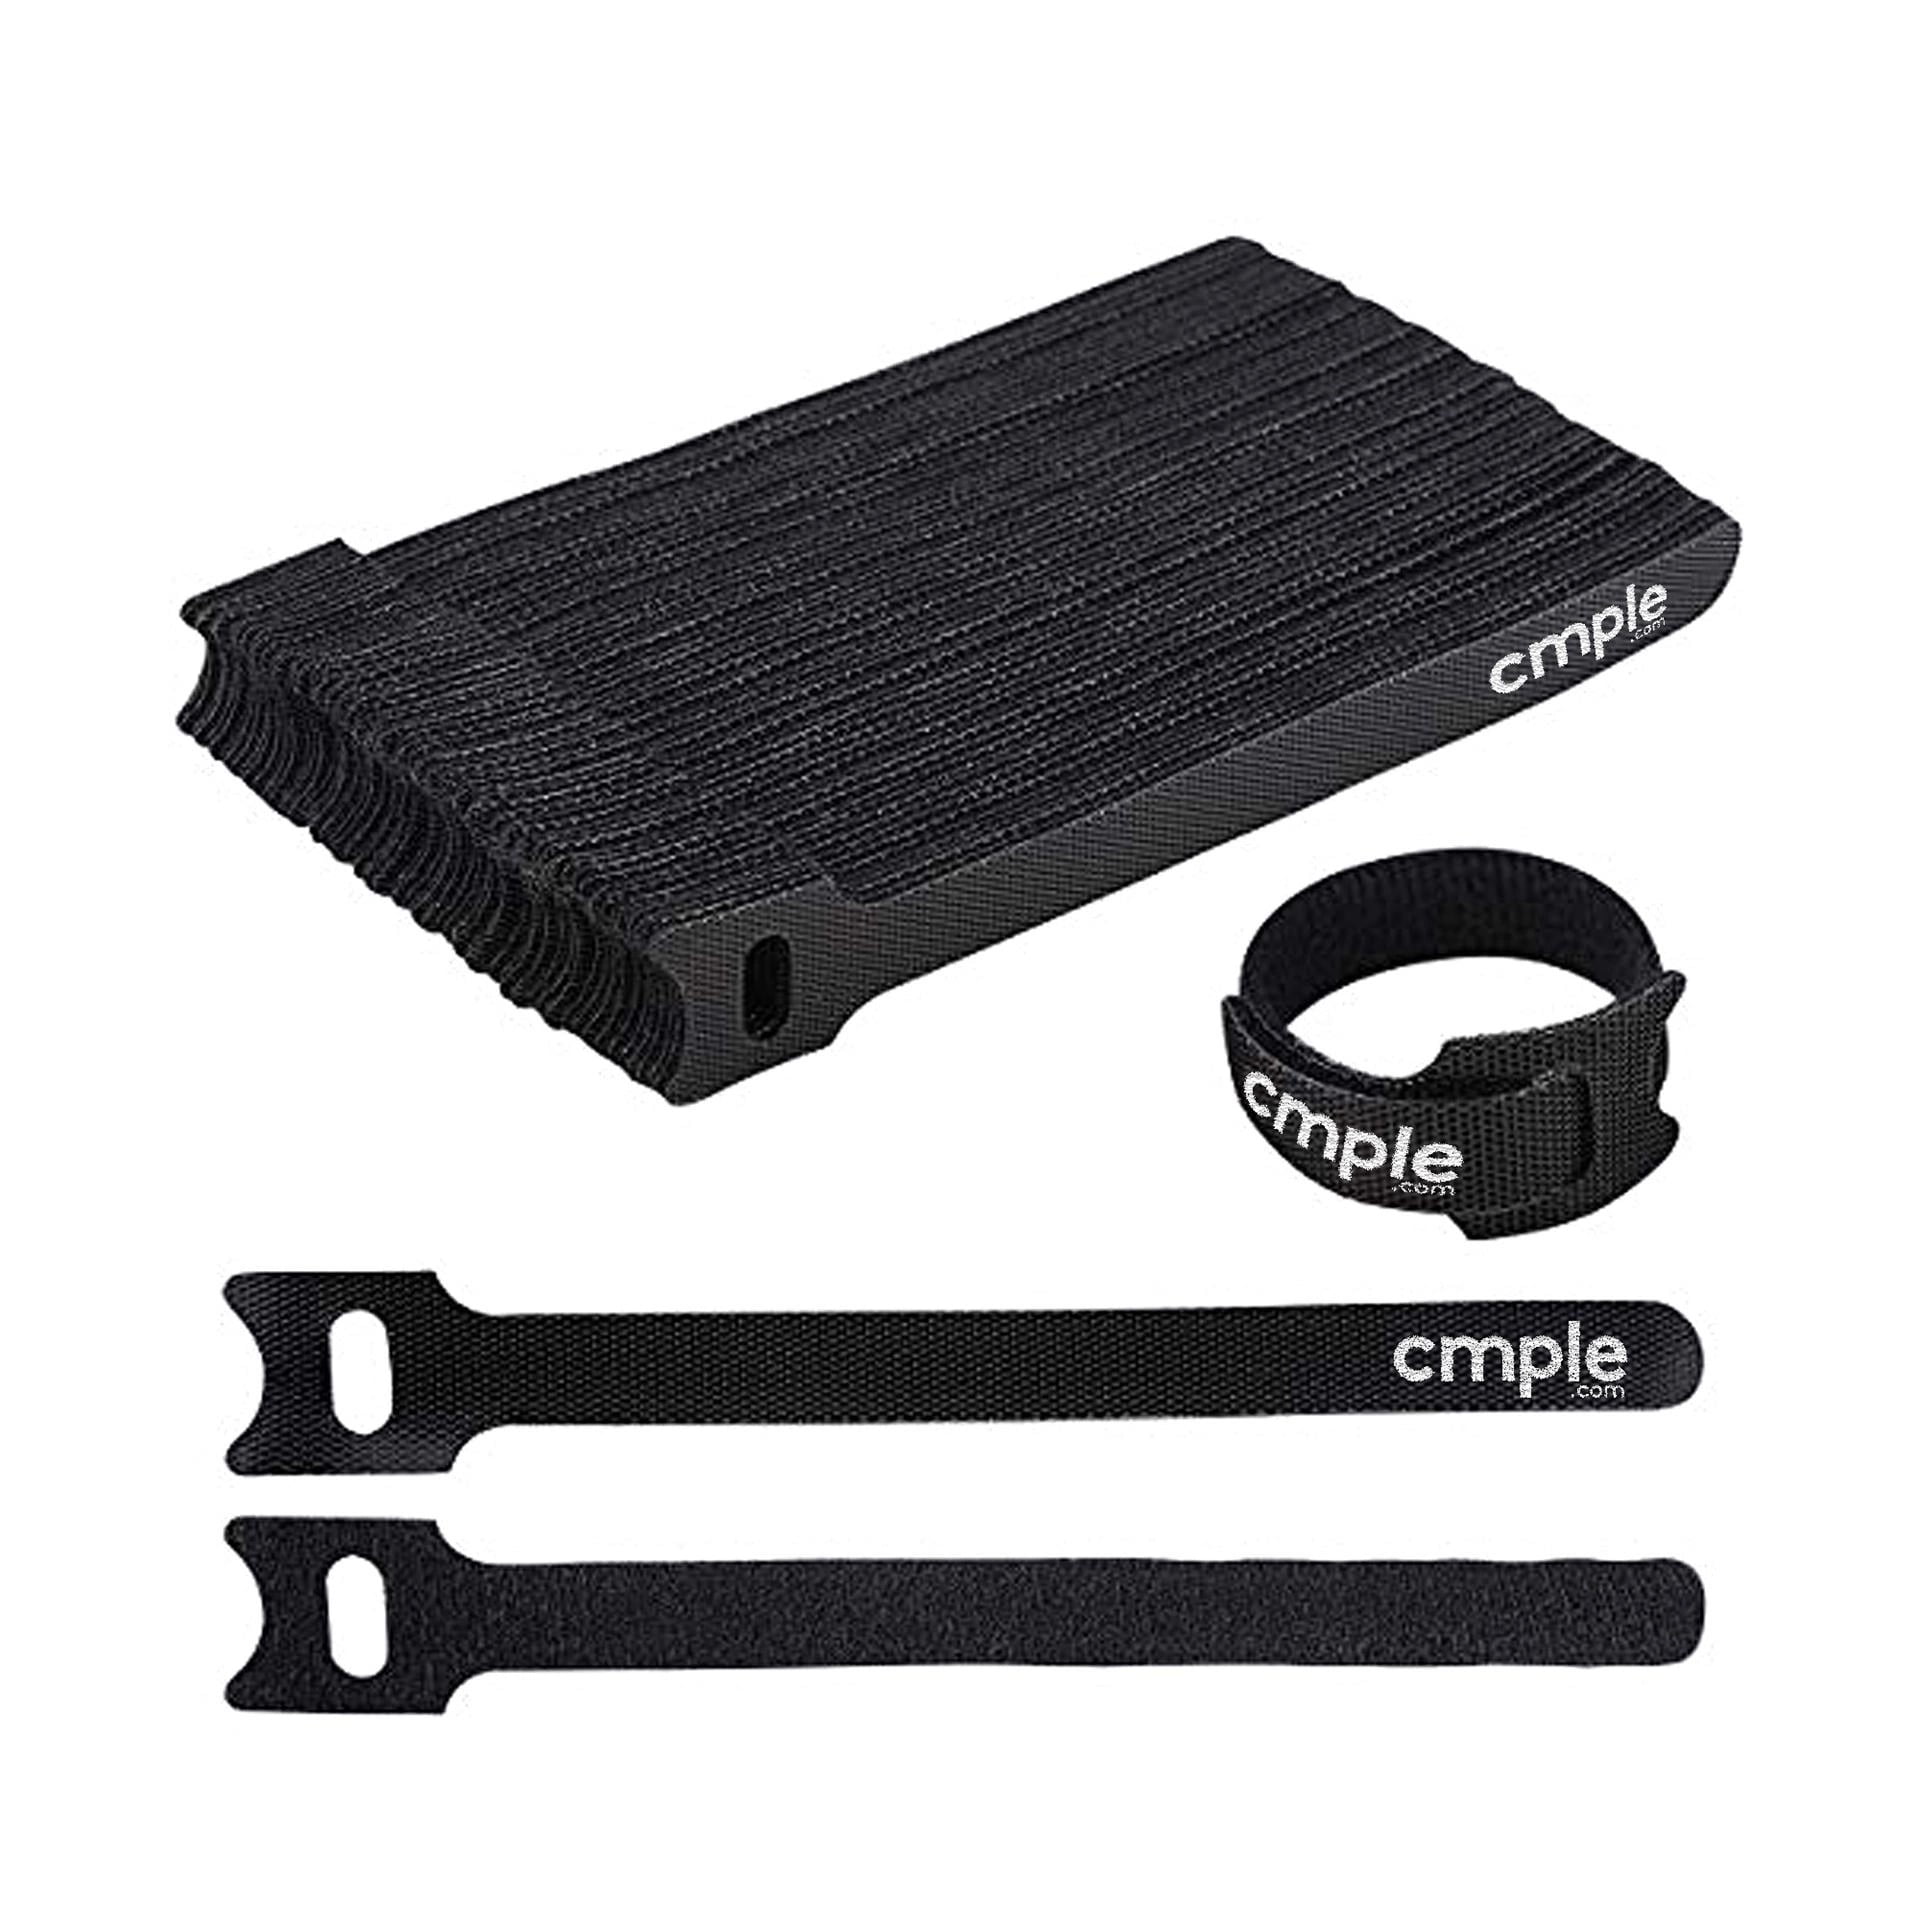 Cmple - 50PCS Reusable Cable Ties, Nylon Adjustable Cord